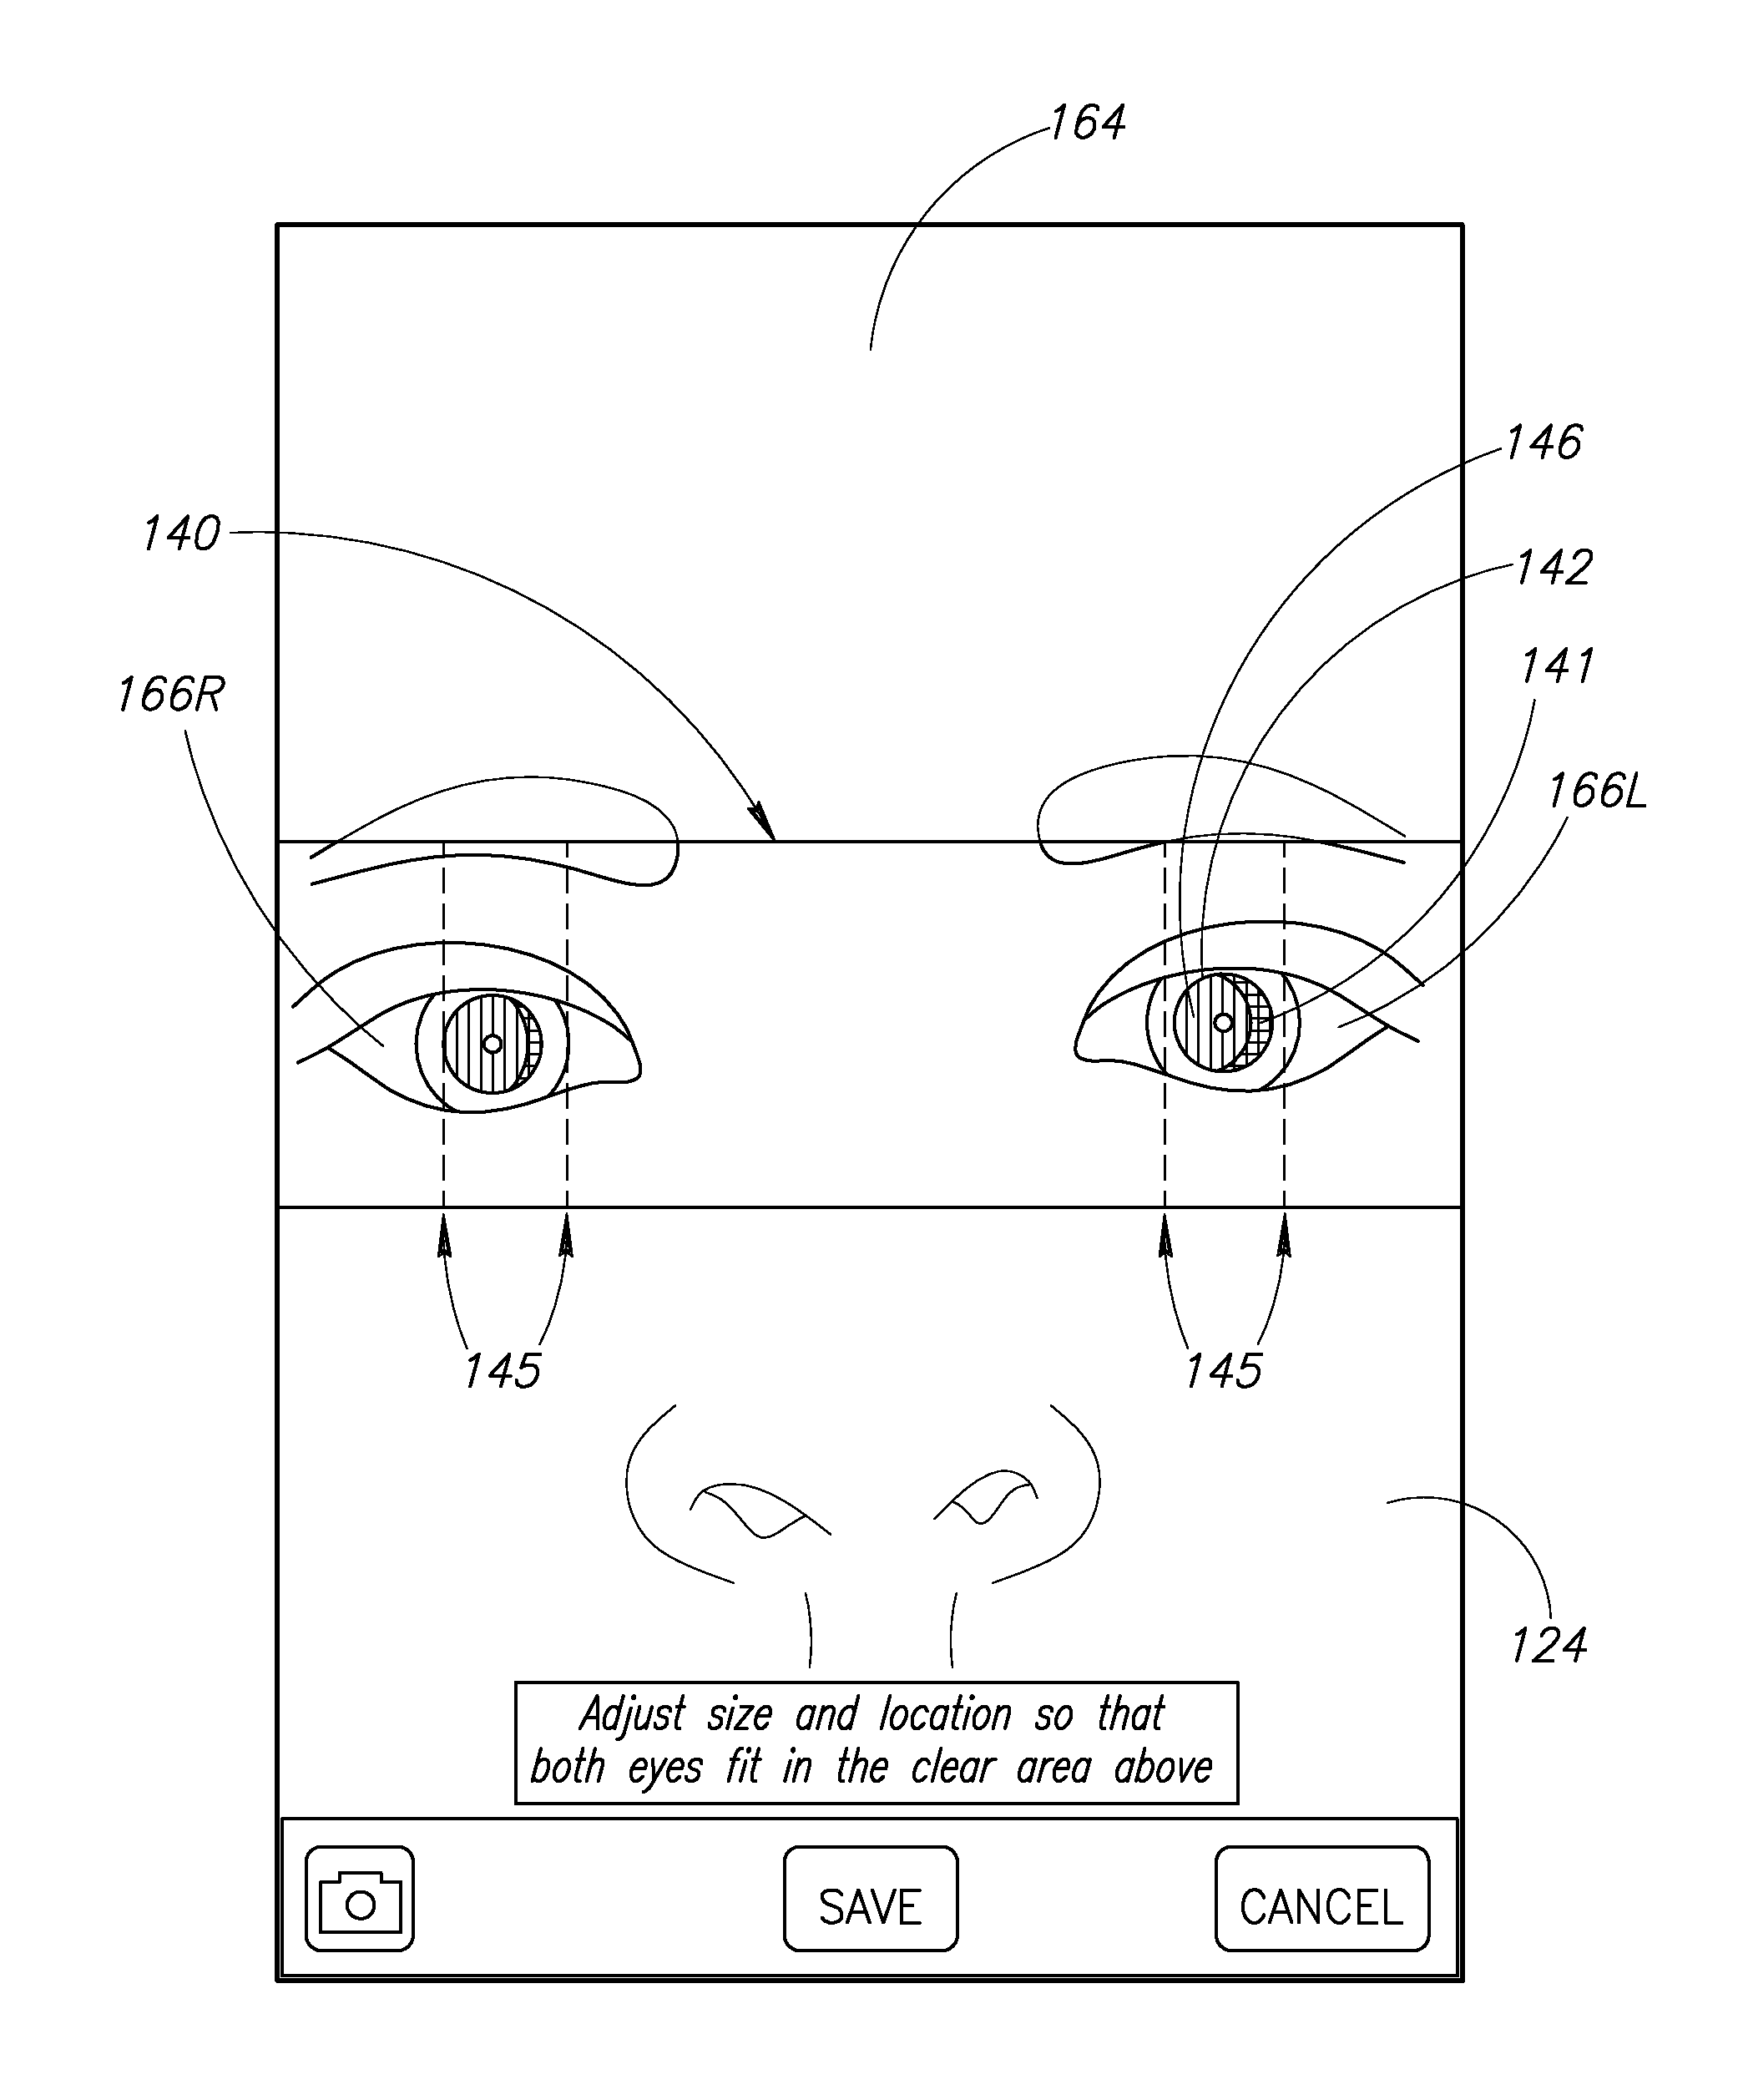 System and methods for documenting and recording of the pupillary red reflex test and corneal light reflex screening of the eye in infants and young children